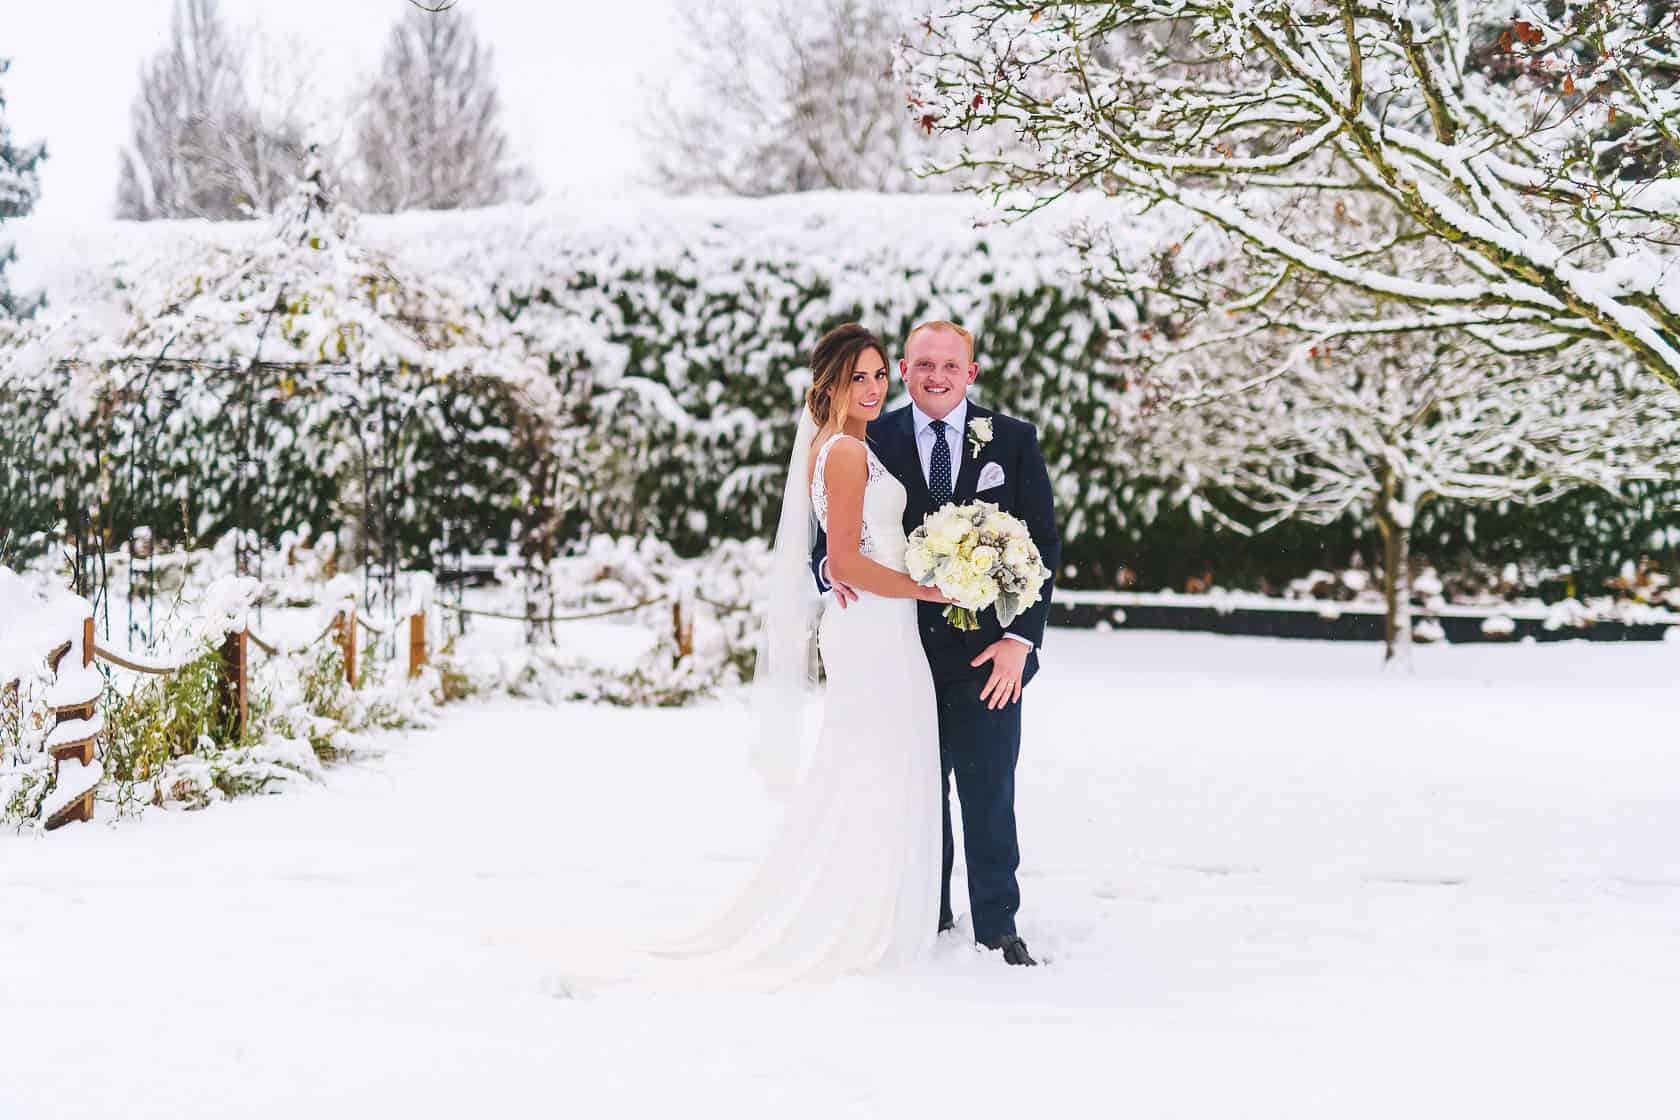 Demi and Louis standing in the Walled Garden at Gaynes Park, after it has been snowing